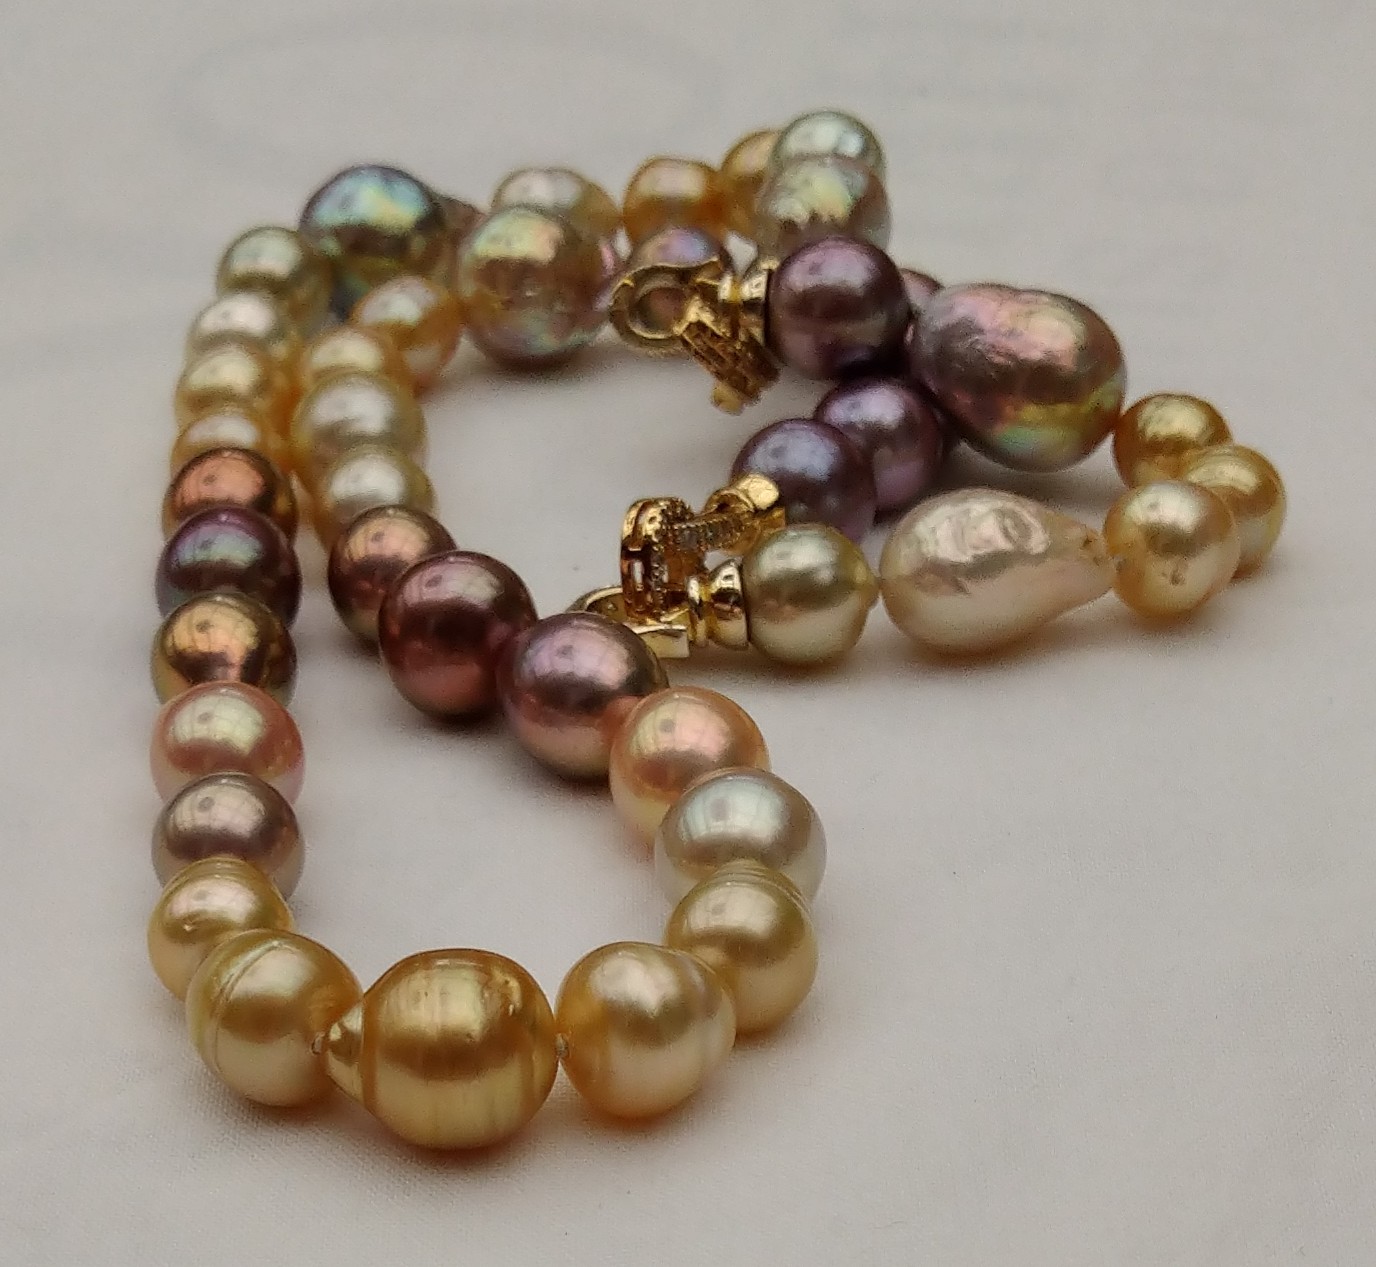 made with pearls from Druzydesign, with a few from Pearlescence, cmw pearls and Kongspearl.